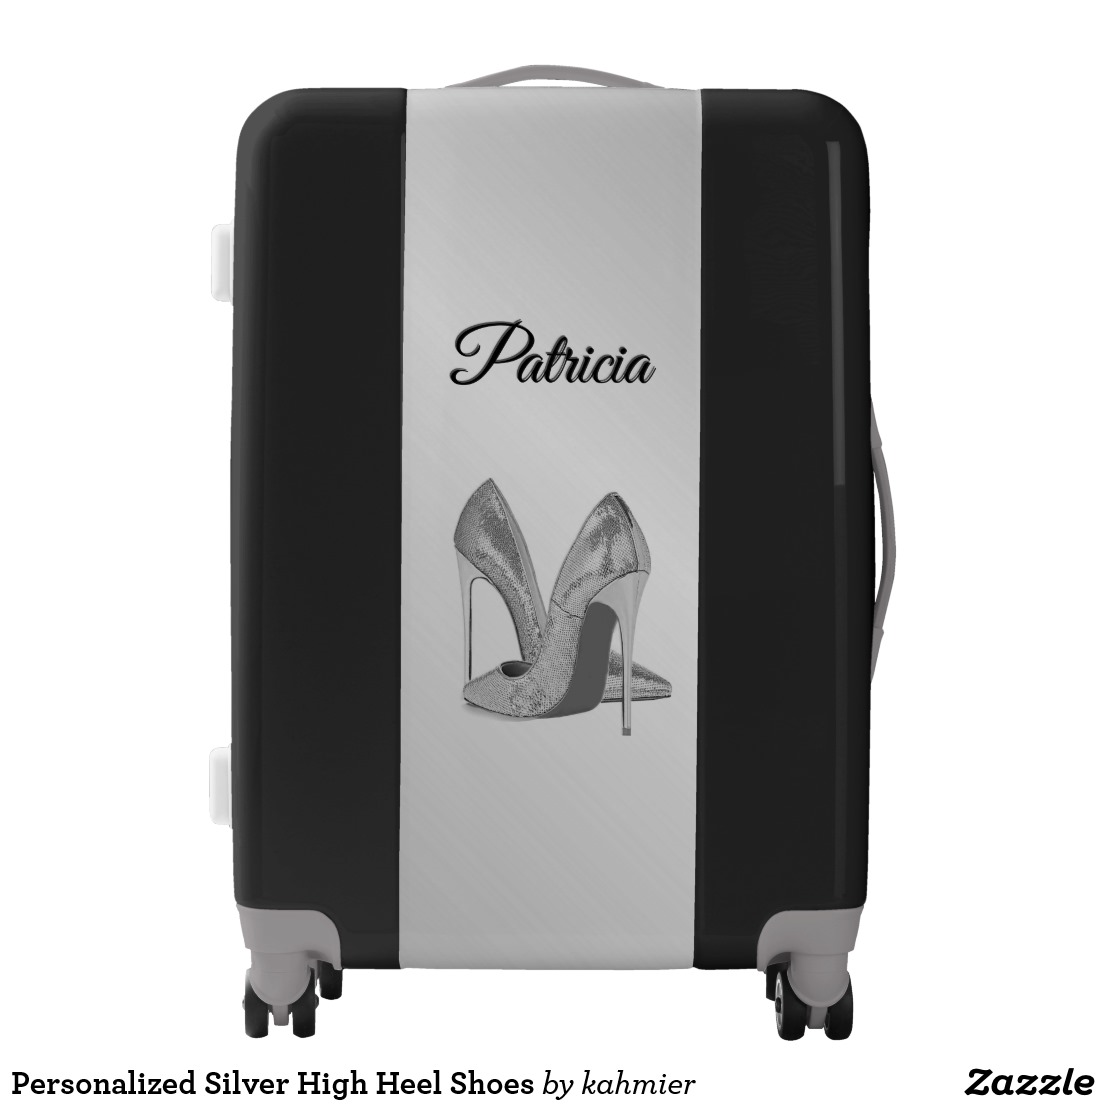 Personalized Silver High Heel Shoes Luggage